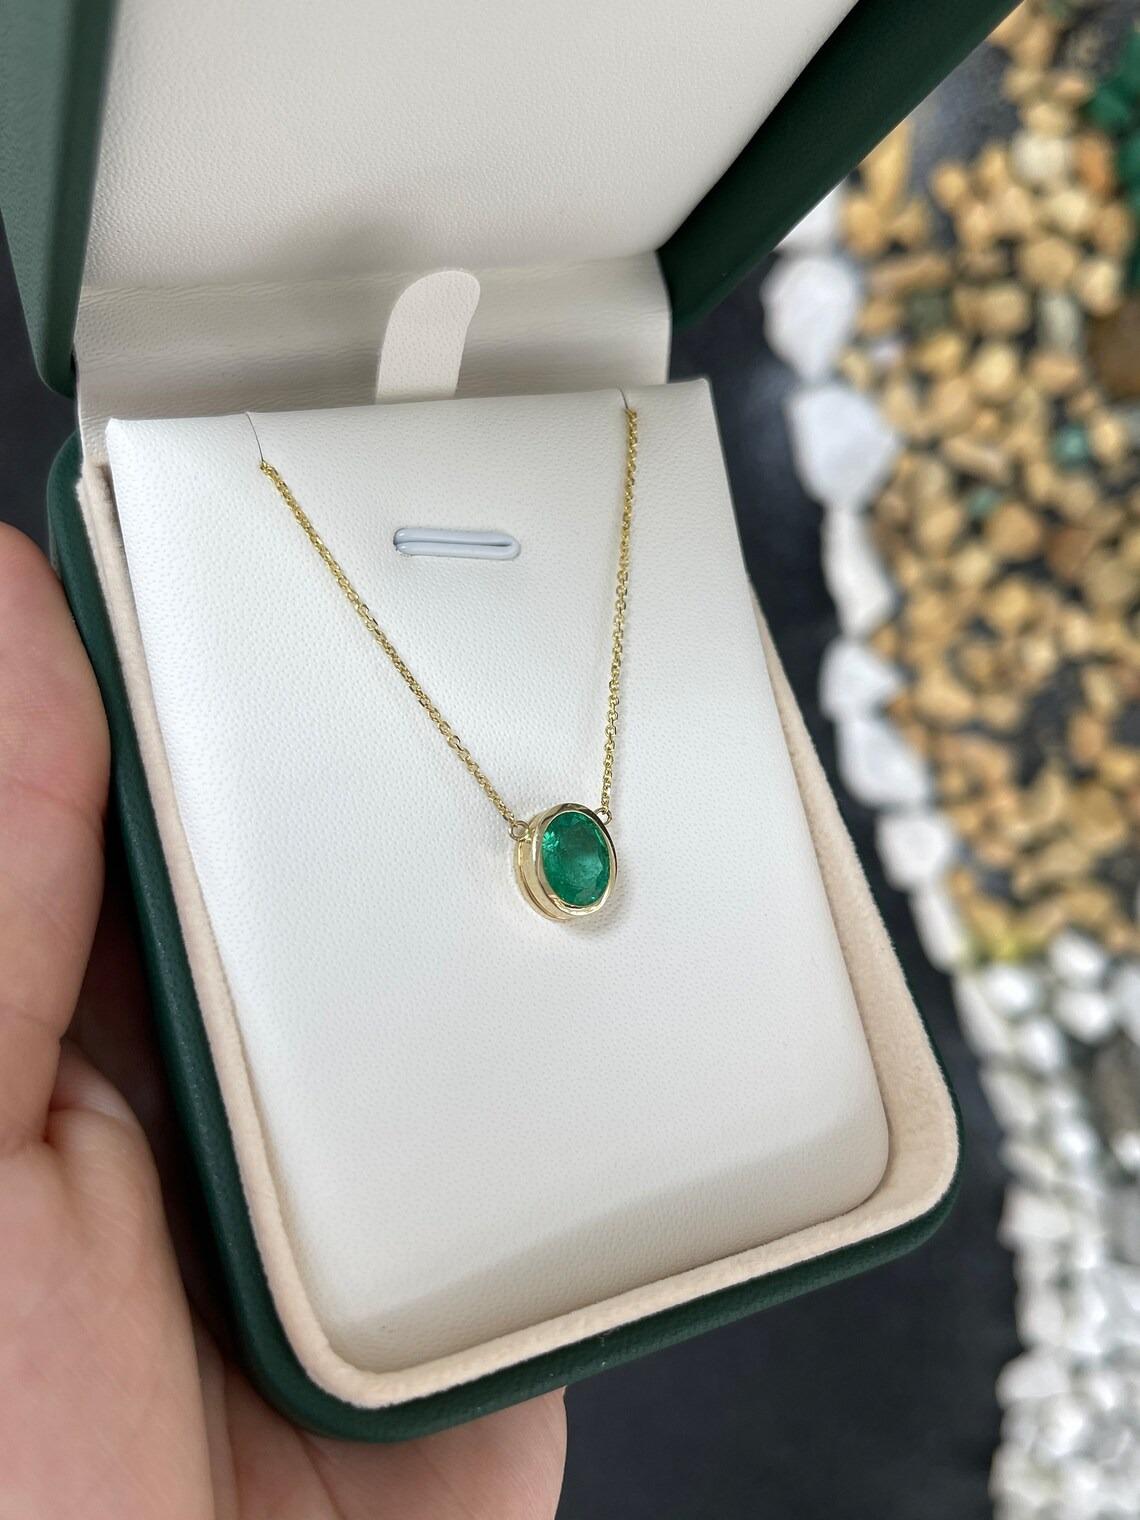 Women's 1.80ct 14K North to South Bezel Set Oval Cut Emerald Stationary Pendant Necklace For Sale